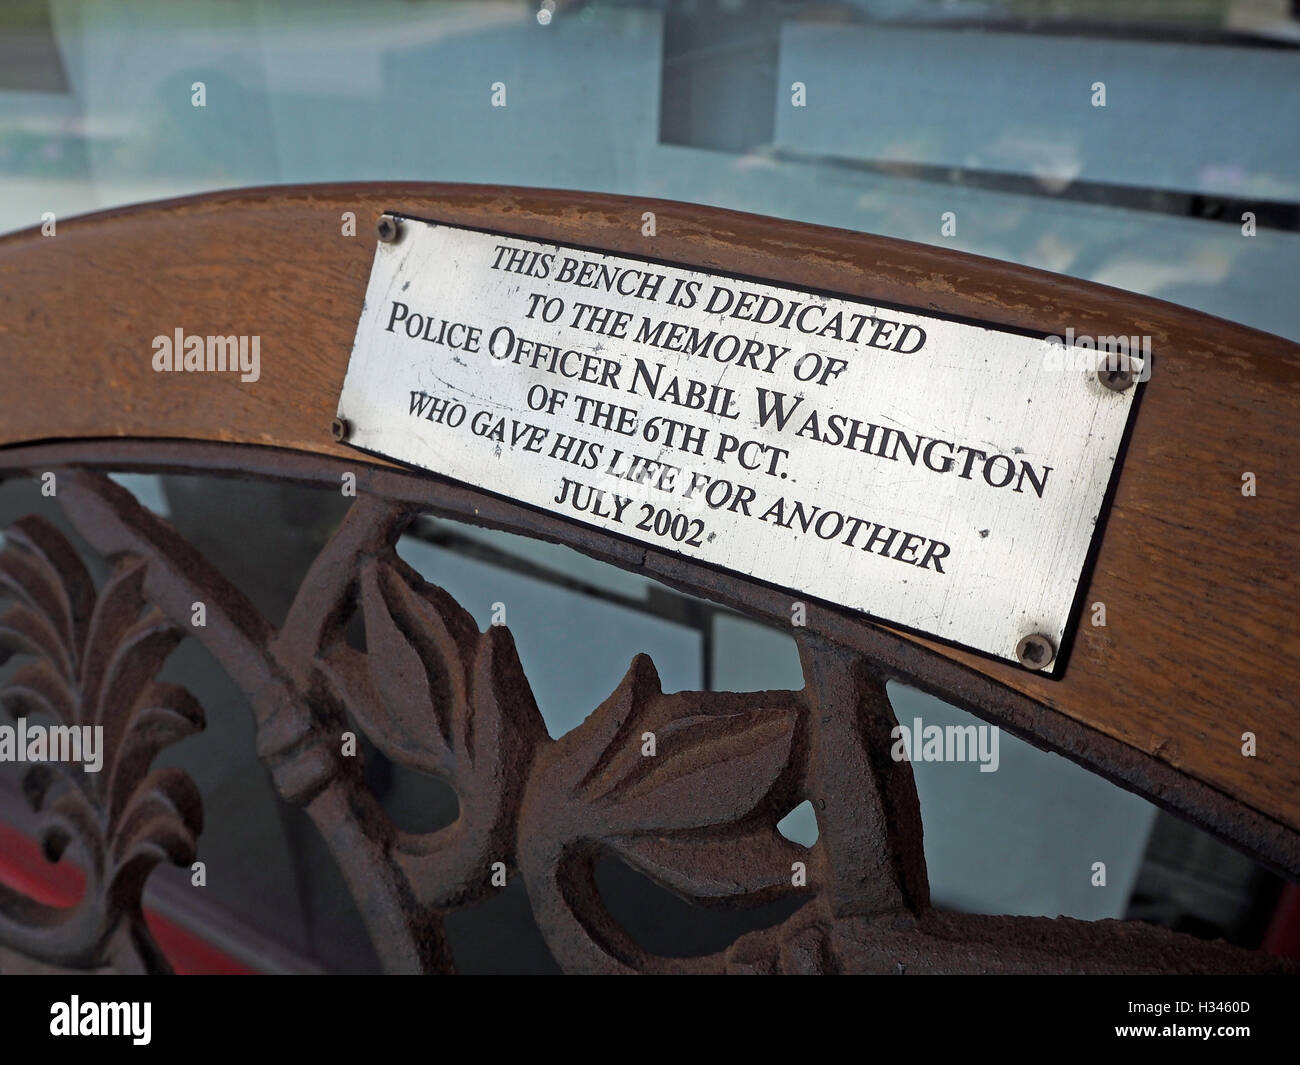 Bench dedicated to the memory of Detroit police officer Nabil Washington. Stock Photo